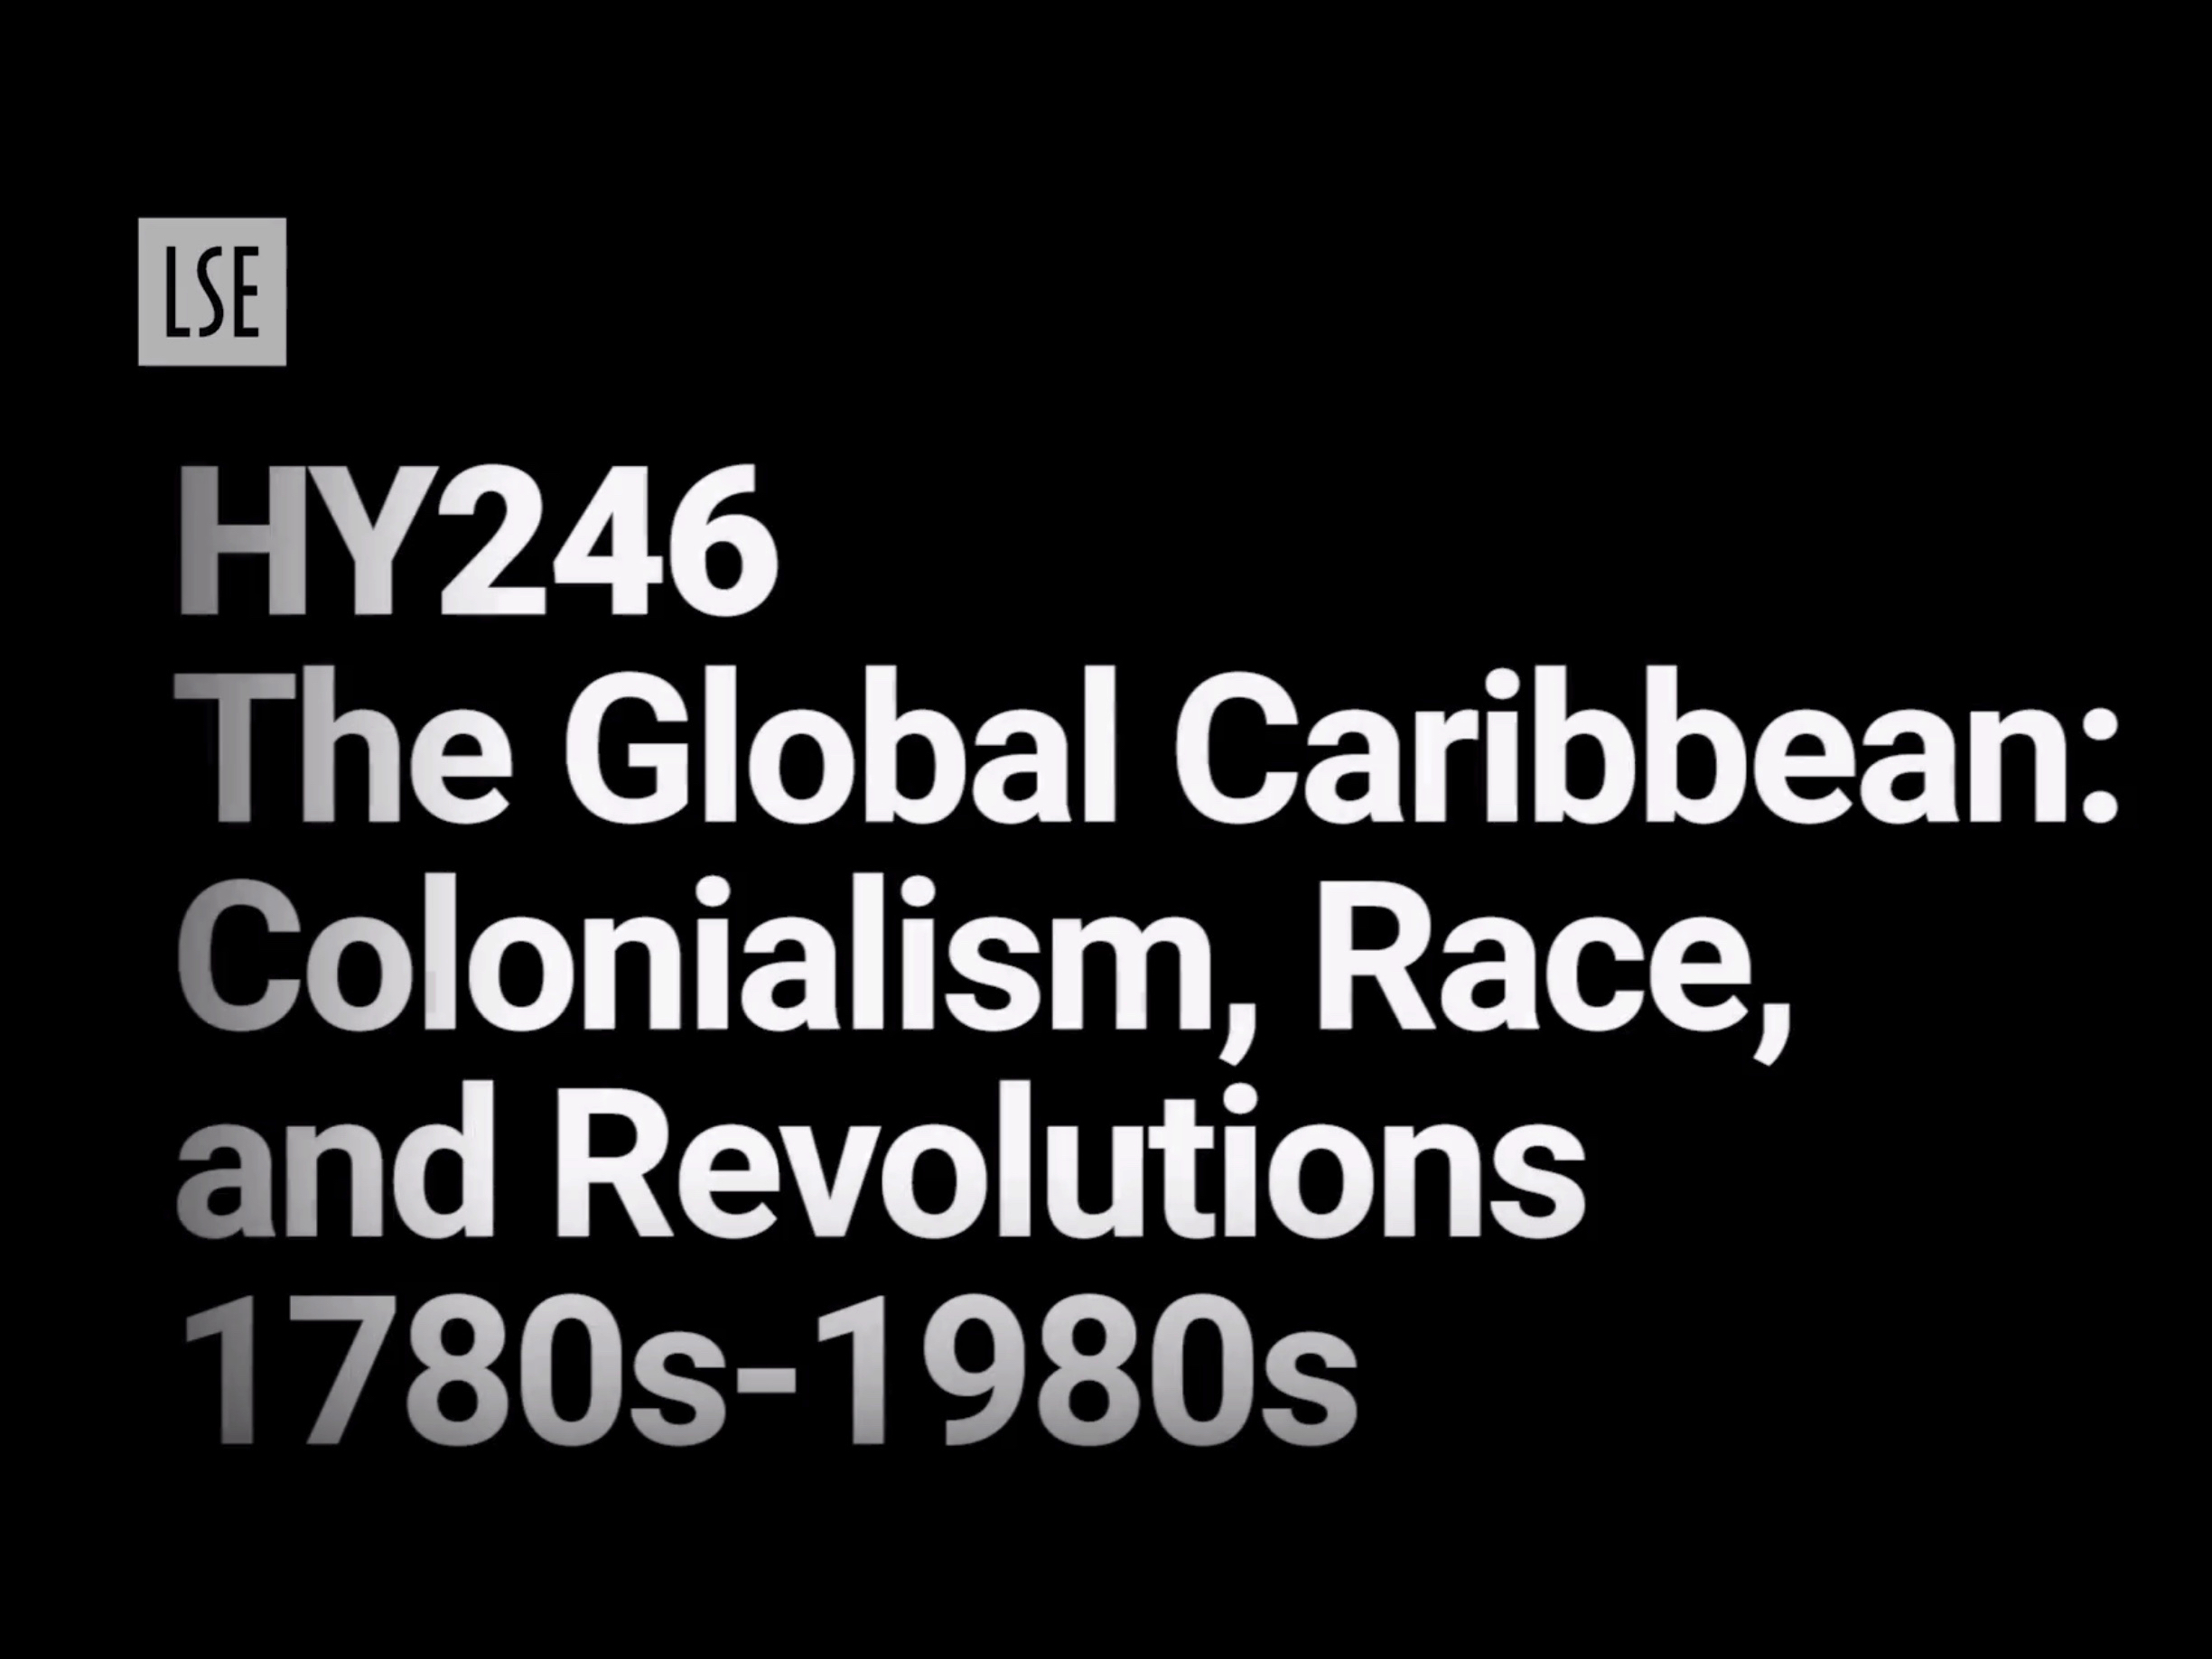 HY246: The Global Caribbean: Colonialism, Race, and Revolutions 1780s-1980s